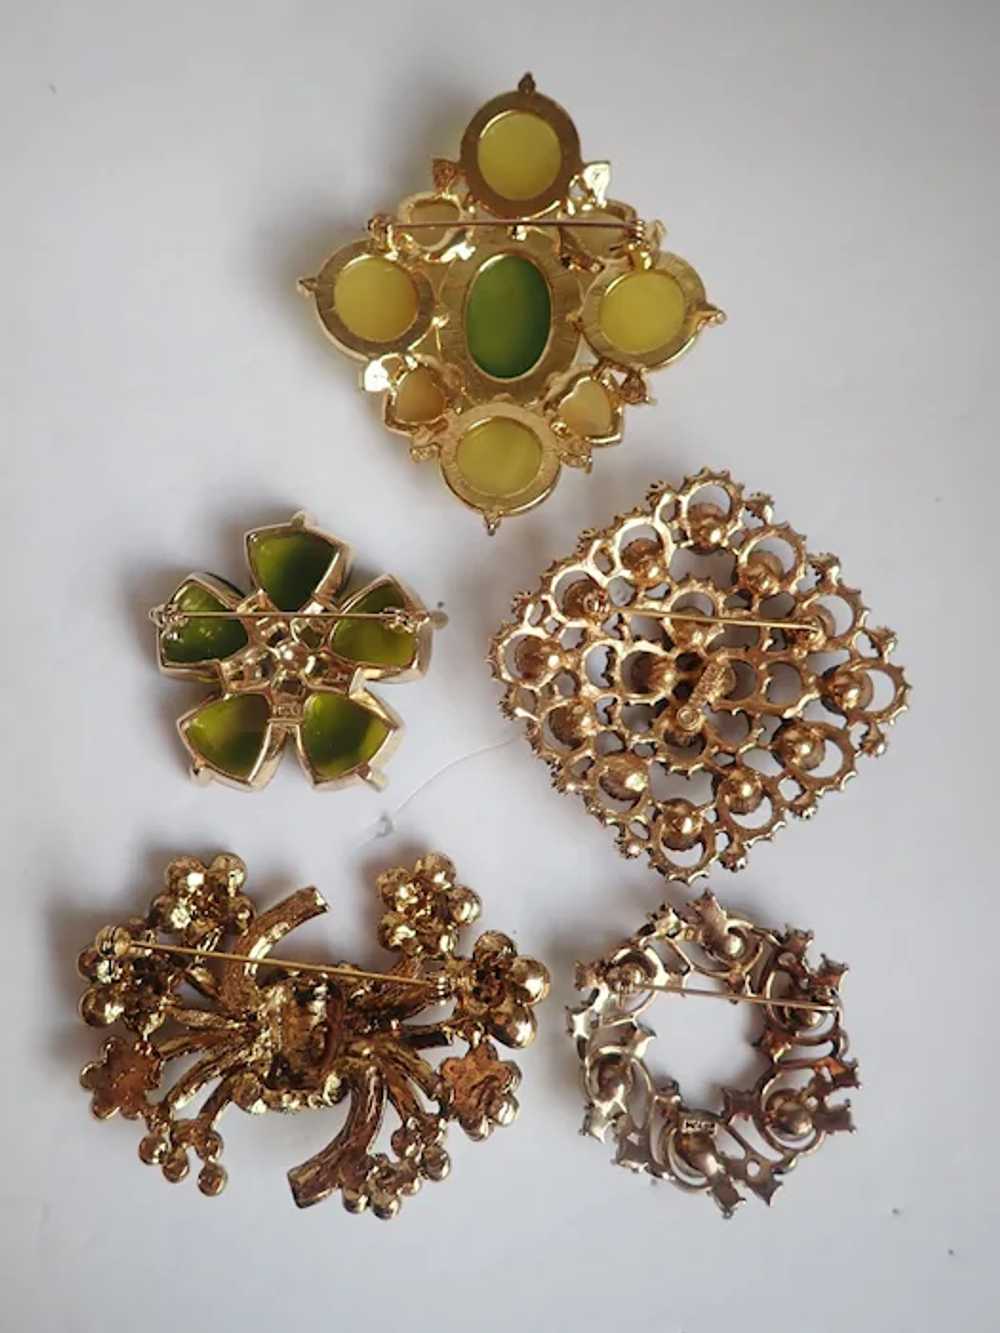 Vintage Collection Of Colorful Pin Brooches - image 7